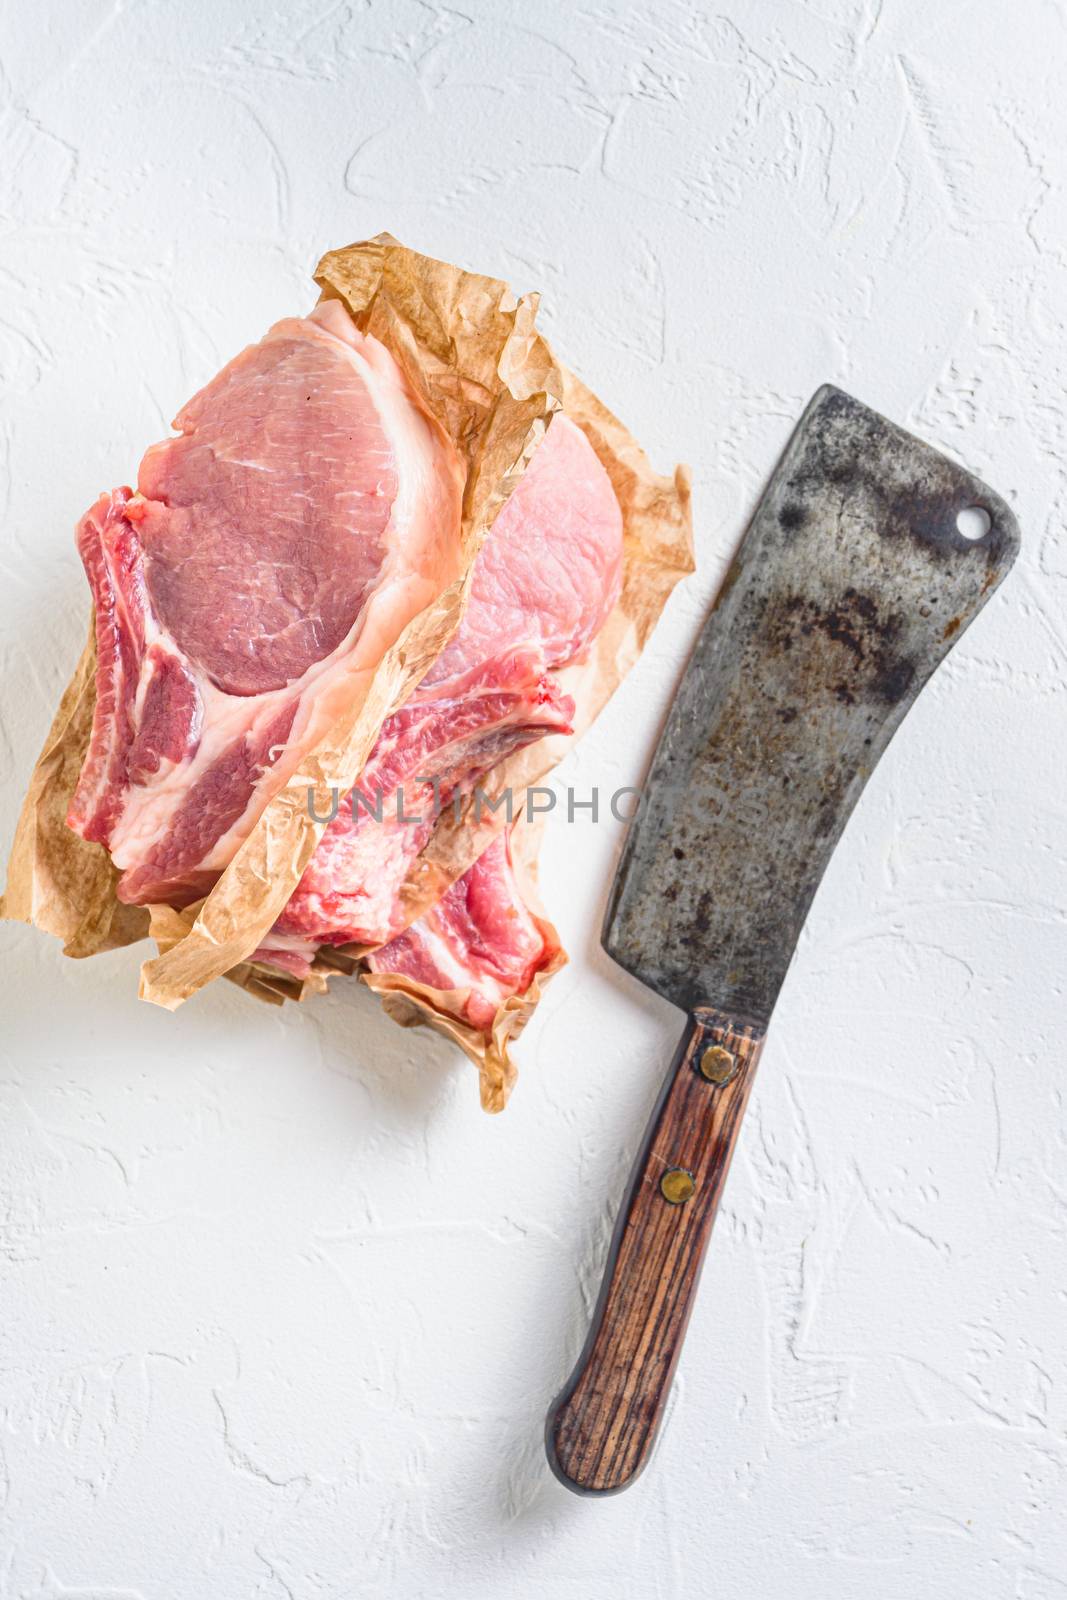 Fresh and raw organic pork loin chops . Top view Vertical. with meat butcher cleaver on white stone background. by Ilianesolenyi